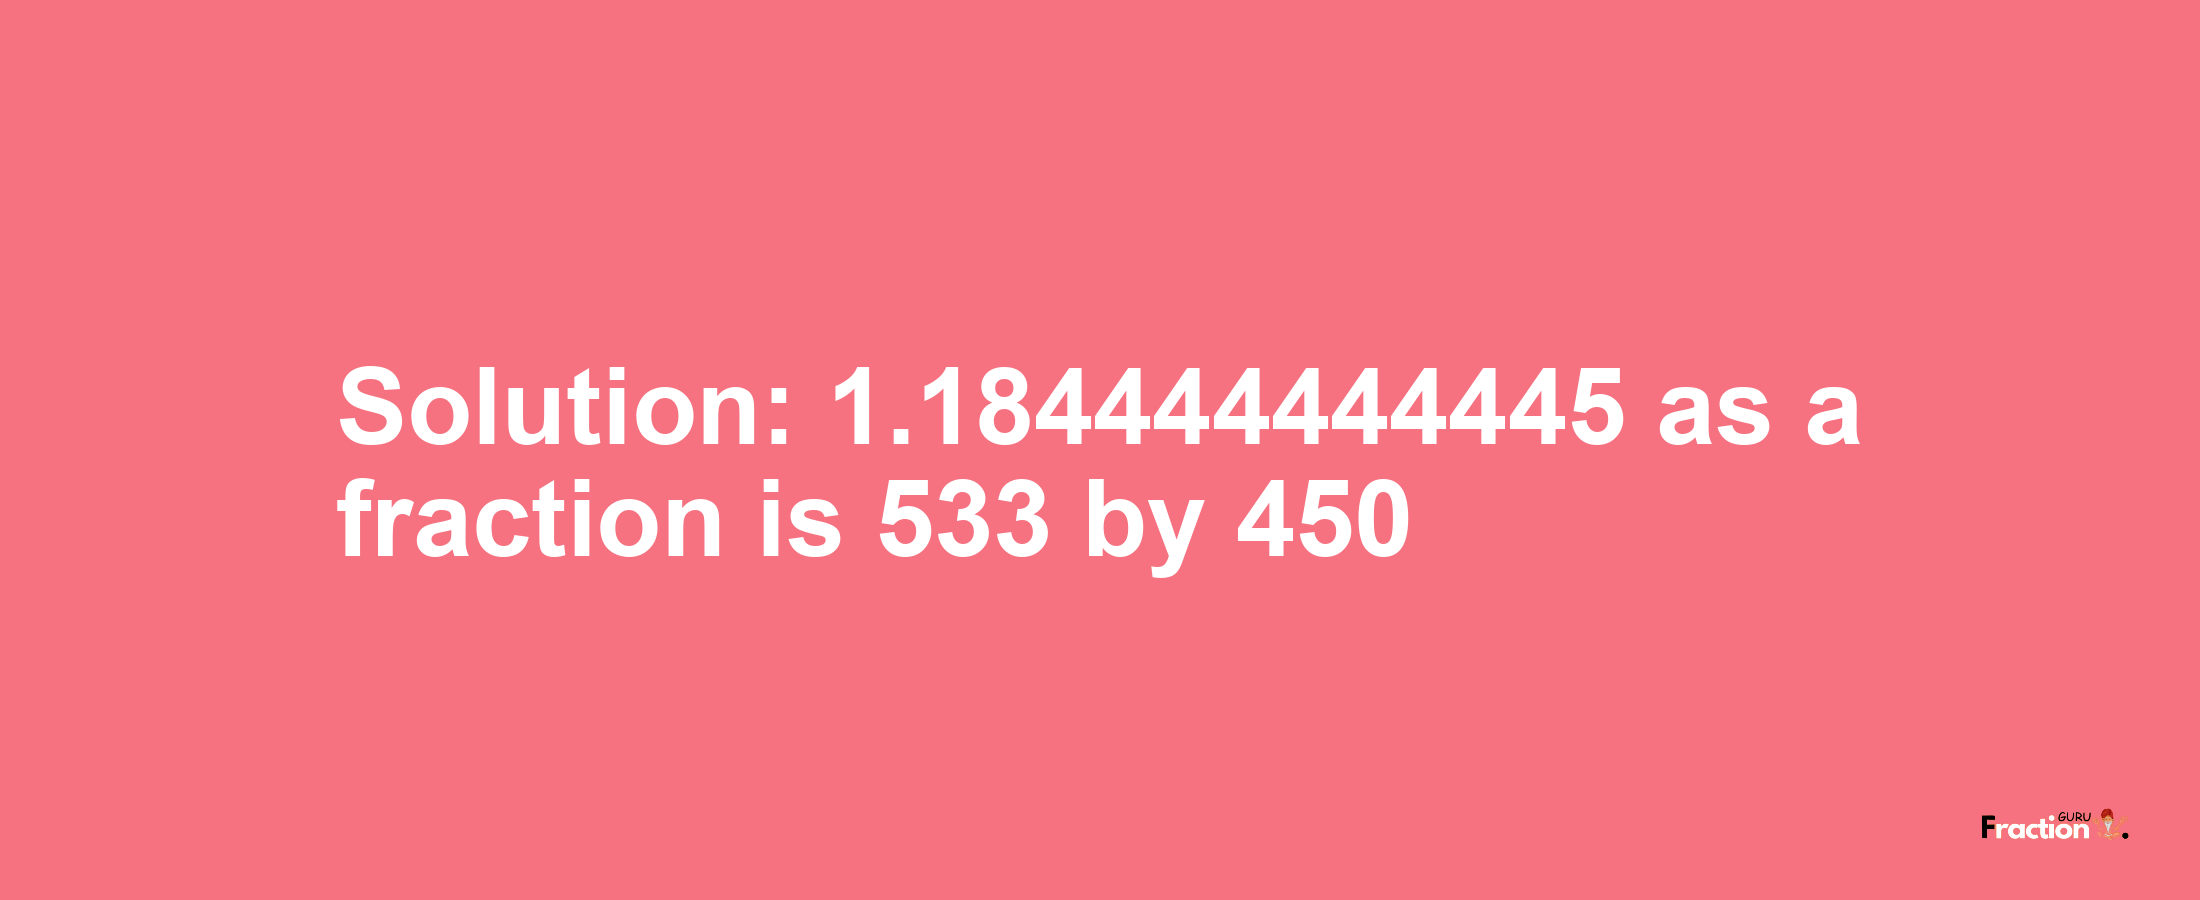 Solution:1.184444444445 as a fraction is 533/450